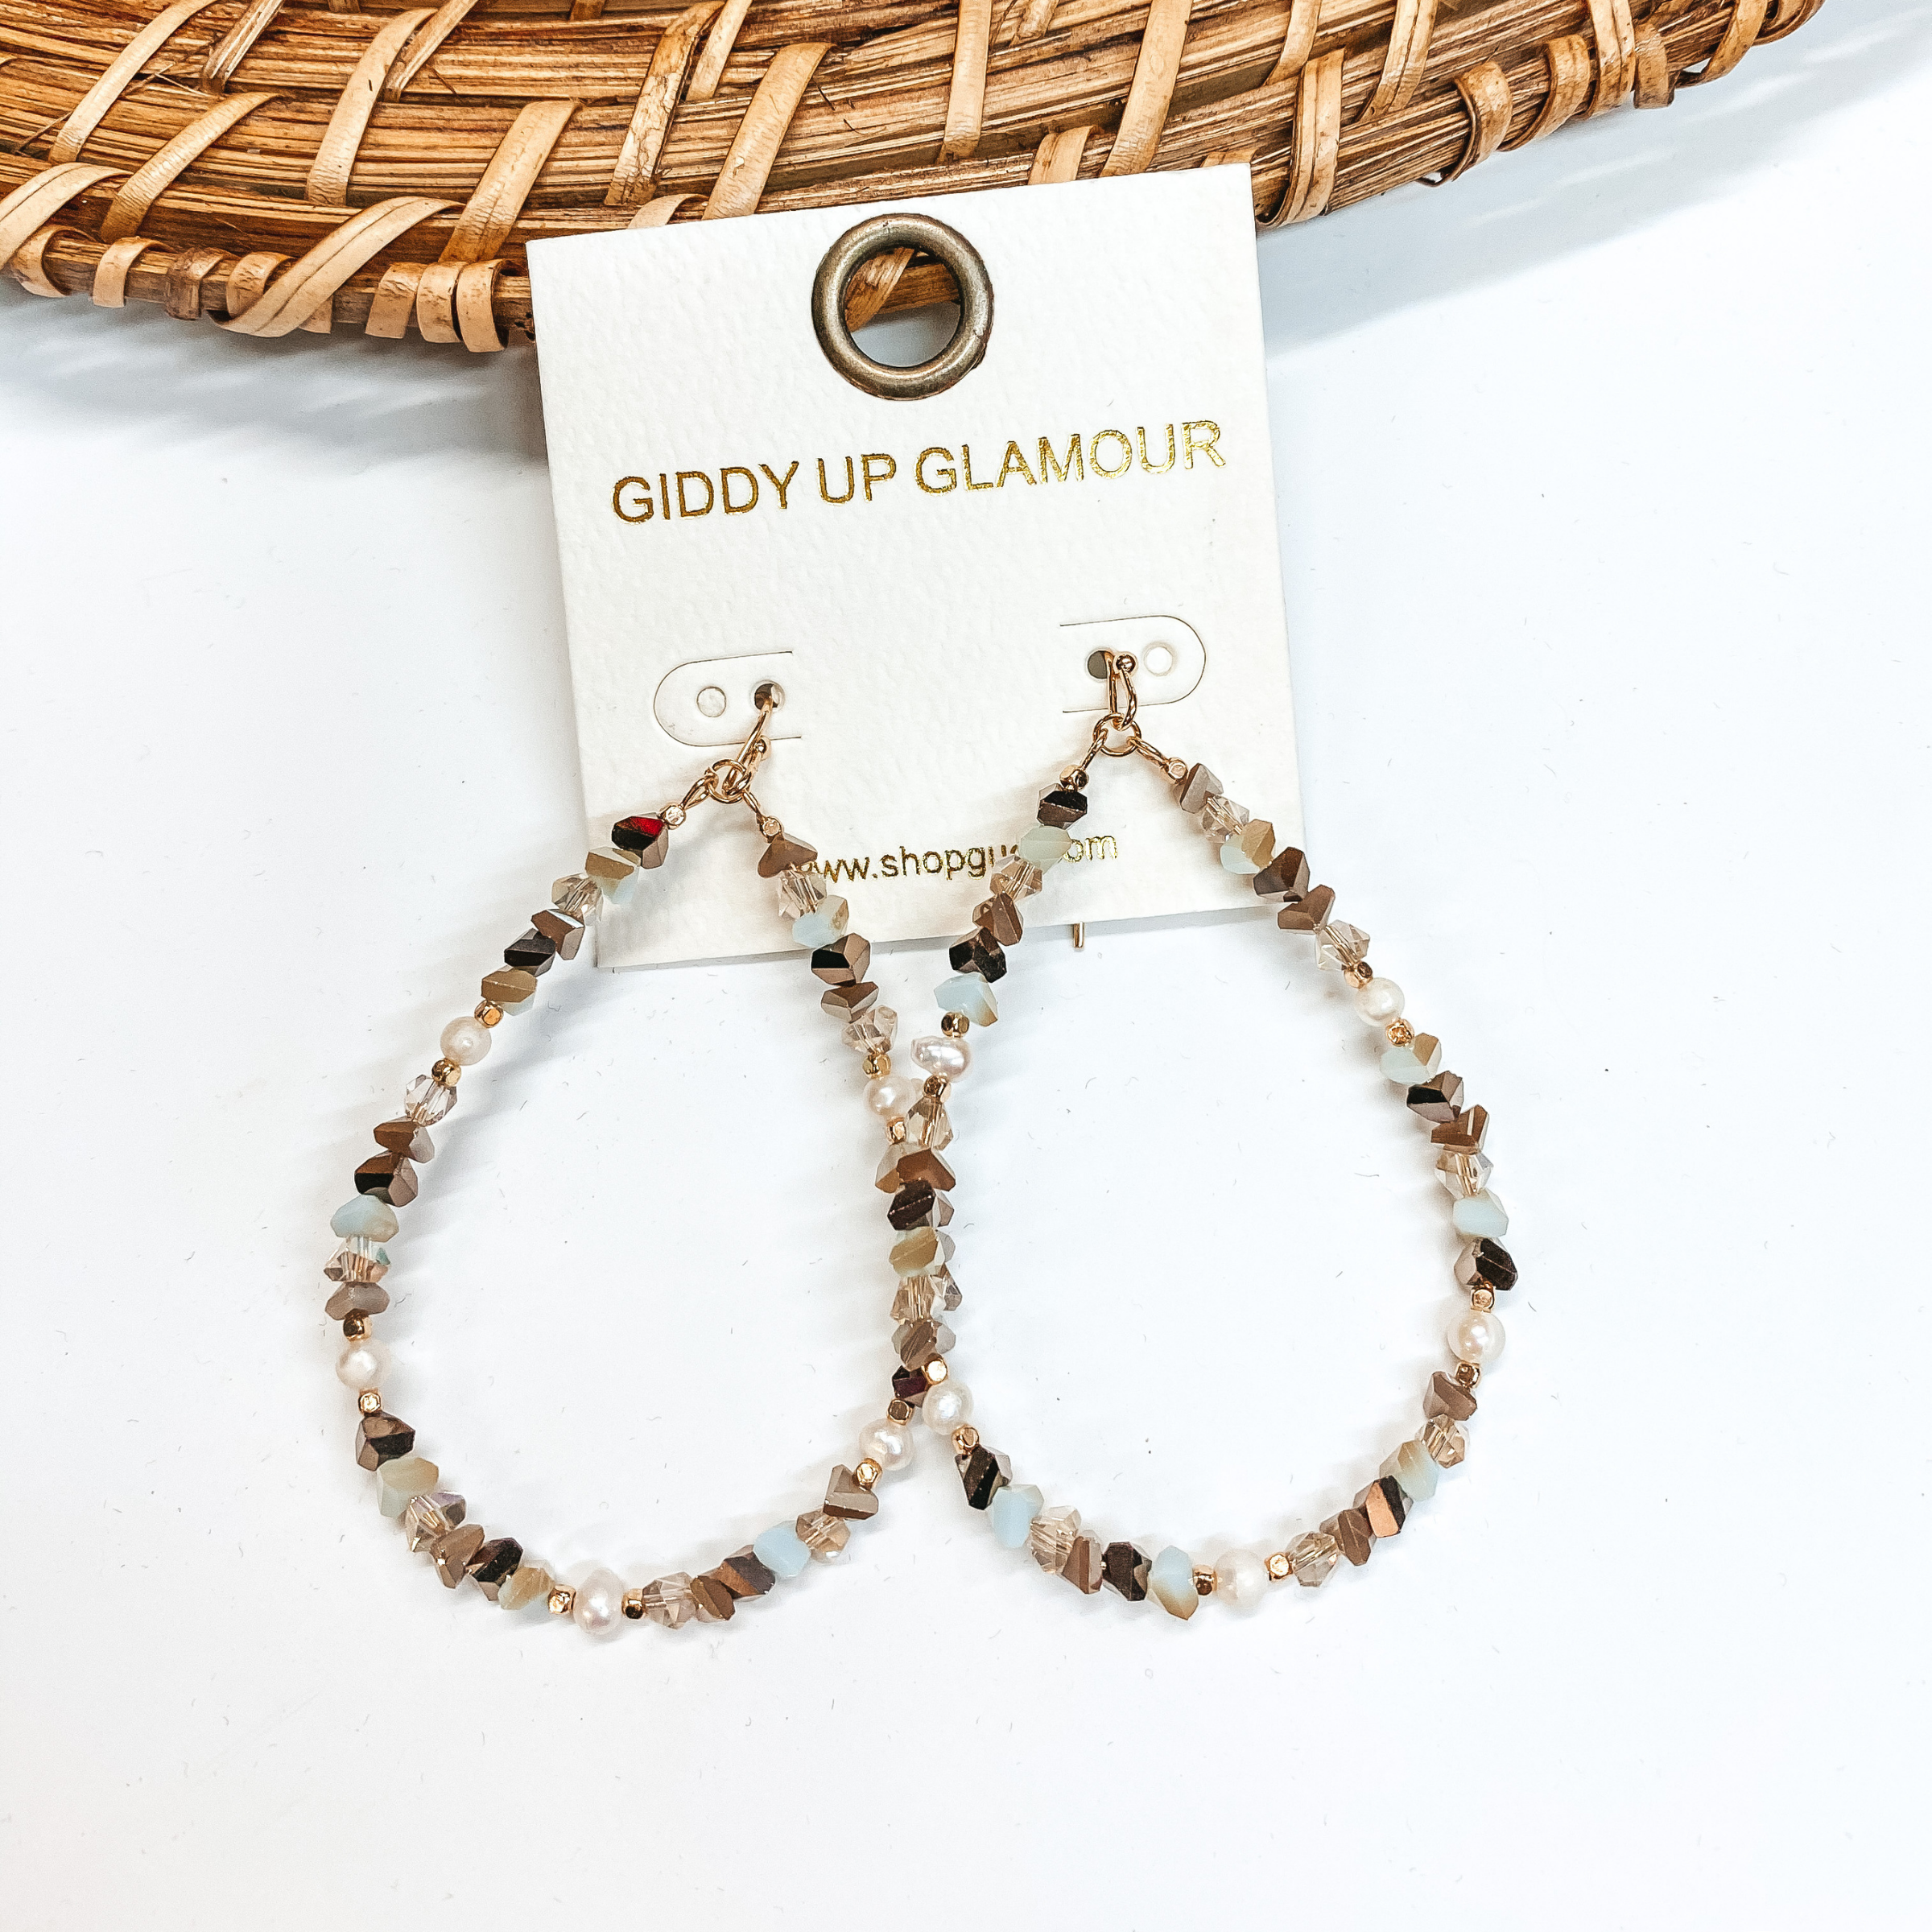 Asymmetrical Crystal Beaded Teardrop Earrings with Pearl Detail in Brown and Light Blue - Giddy Up Glamour Boutique